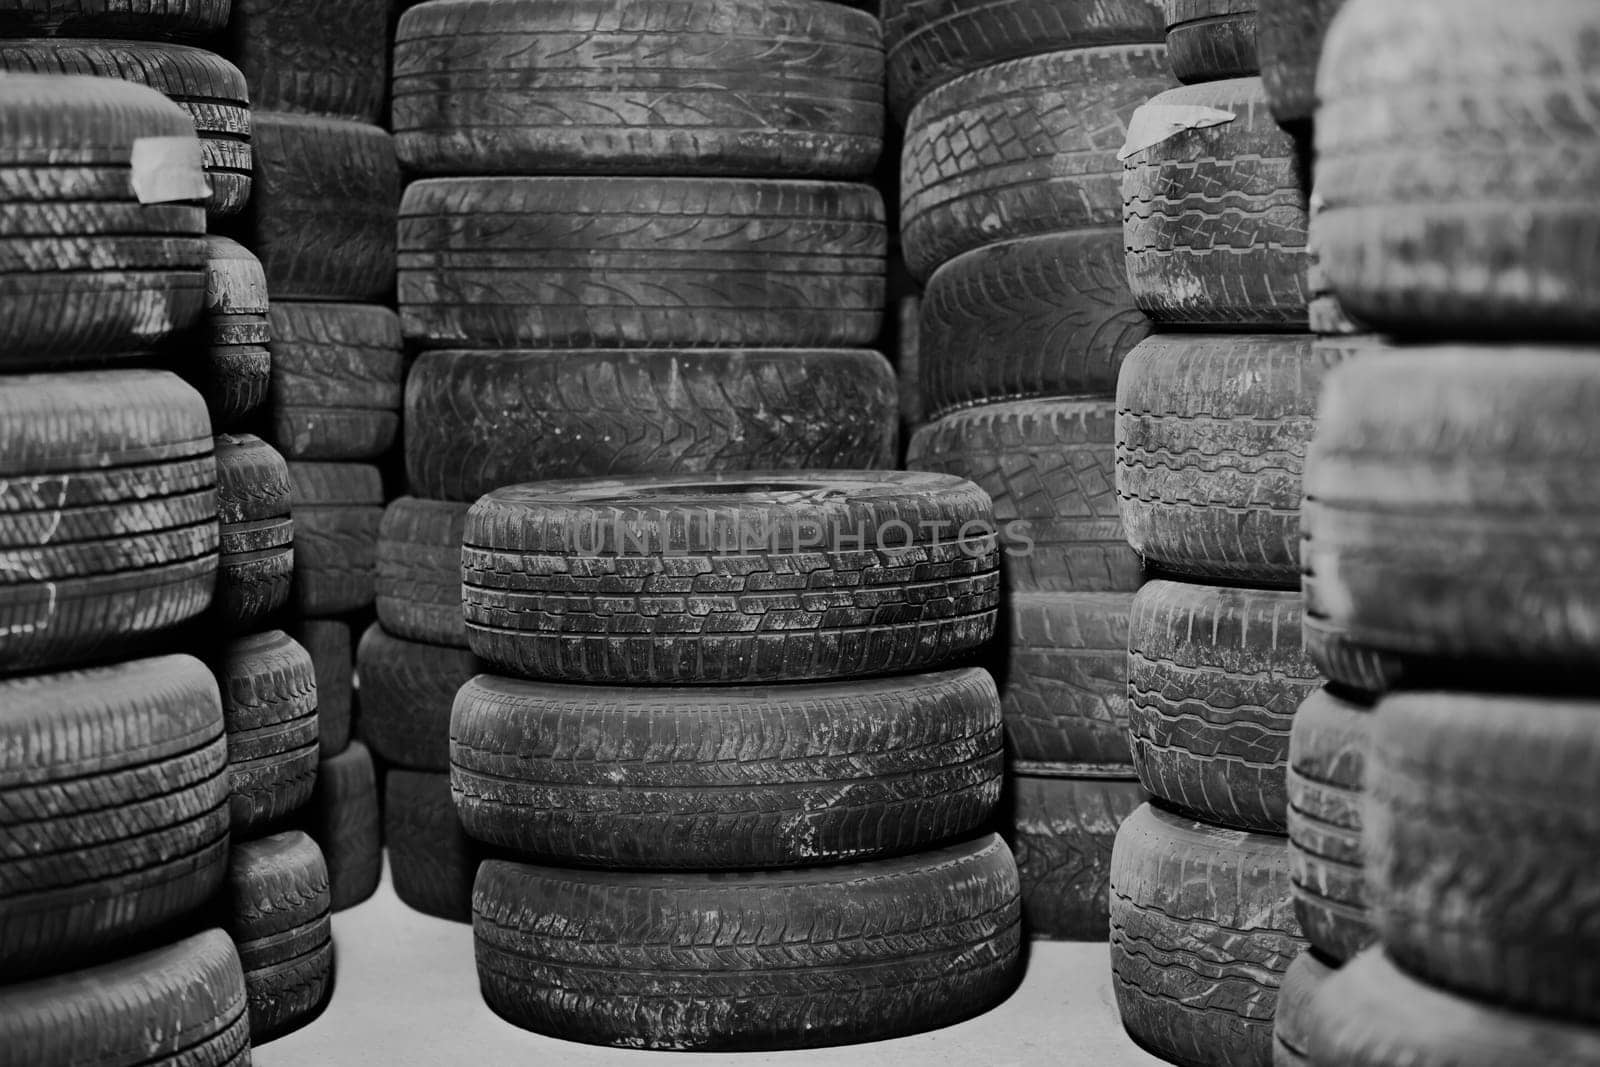 Worn out or used car tires in the warehouse, service center, stored tires, transportation concept